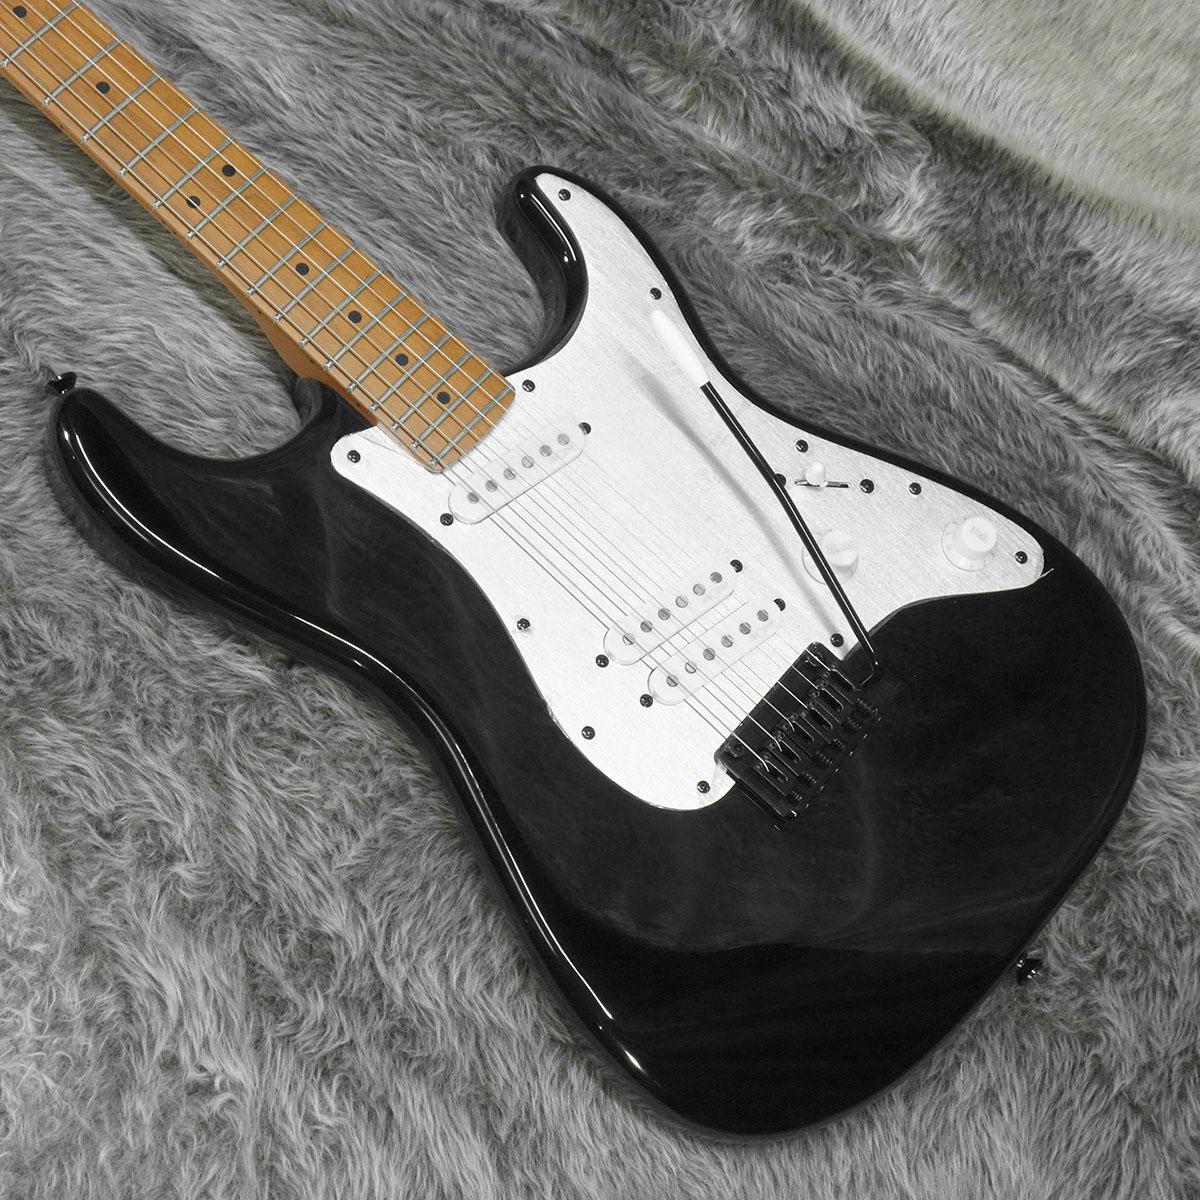 Contemporary Stratocaster Special Roasted MN Silver Anodized Pickguard Black